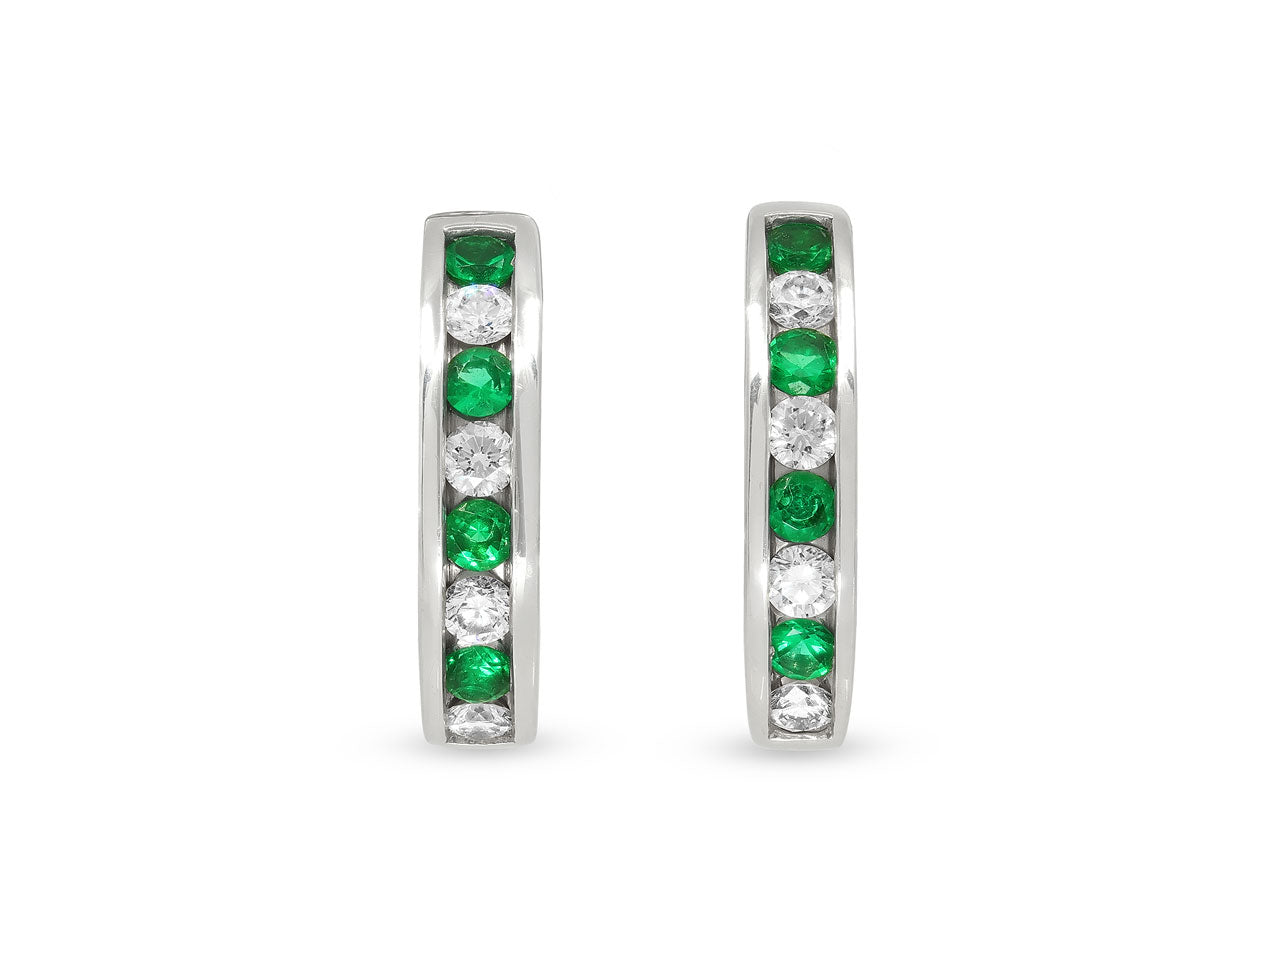 Tiffany & Co. Emerald and Diamond Earrings in 18K White Gold